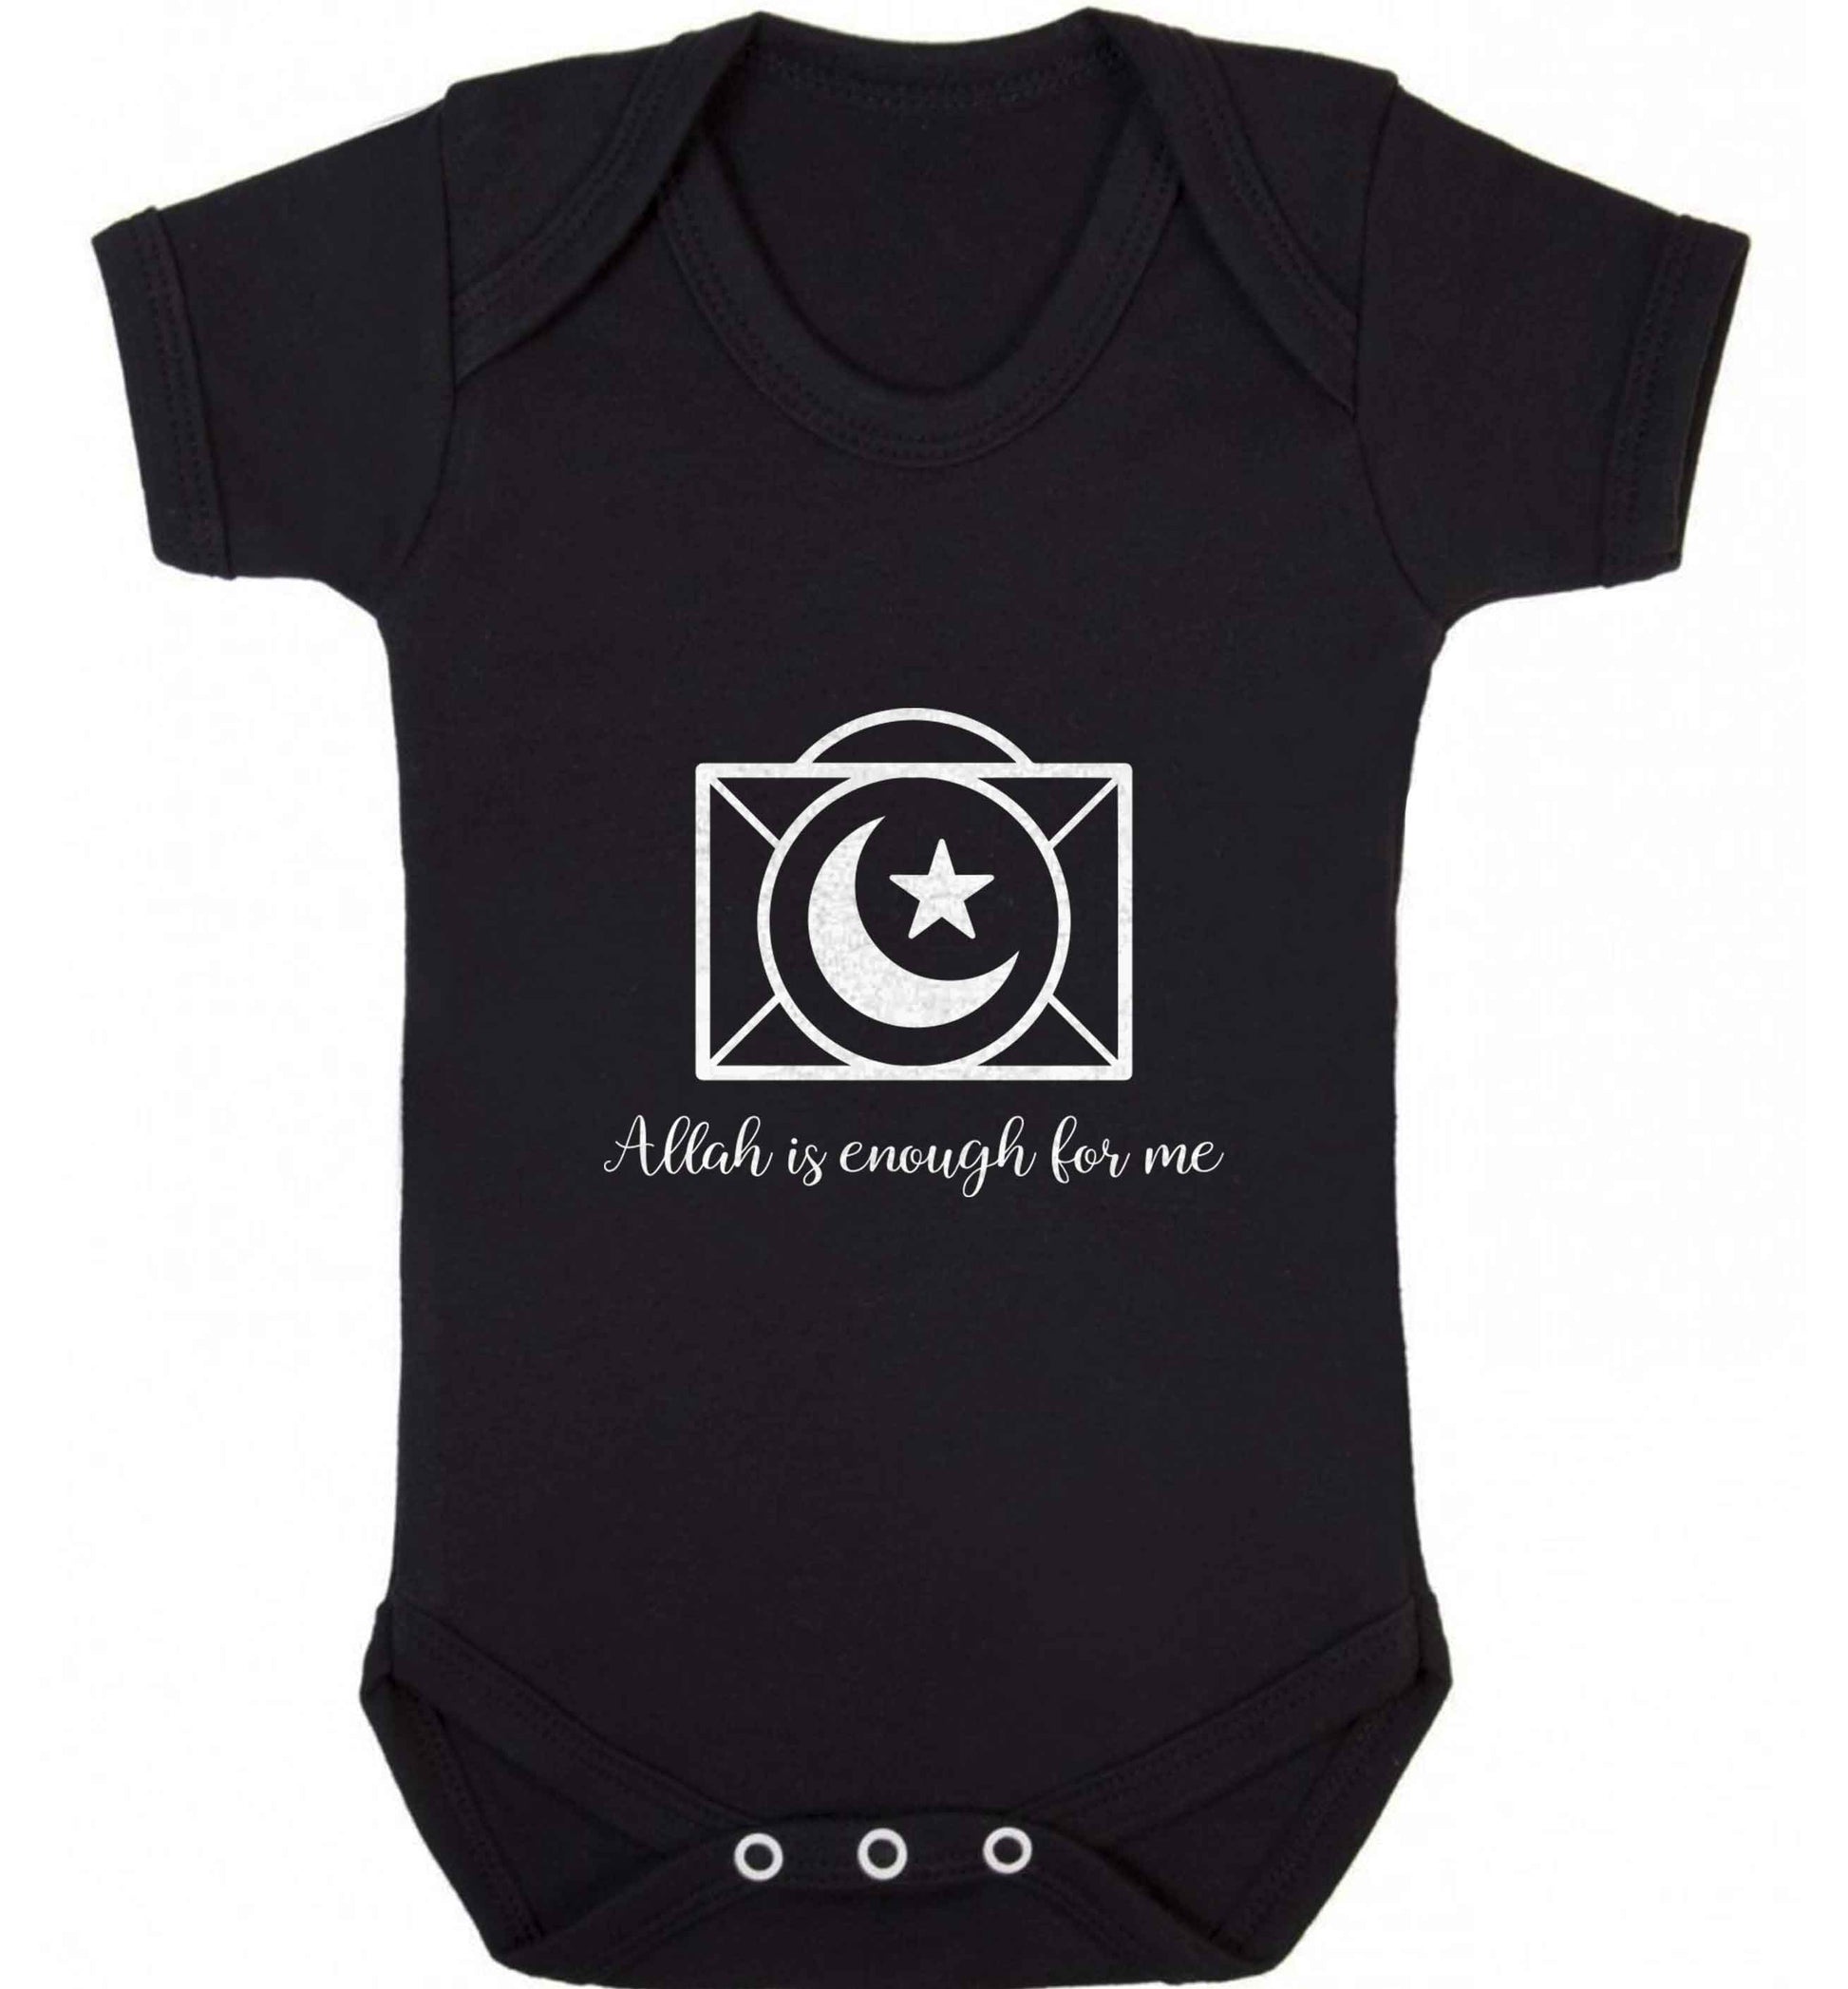 Allah is enough for me baby vest black 18-24 months